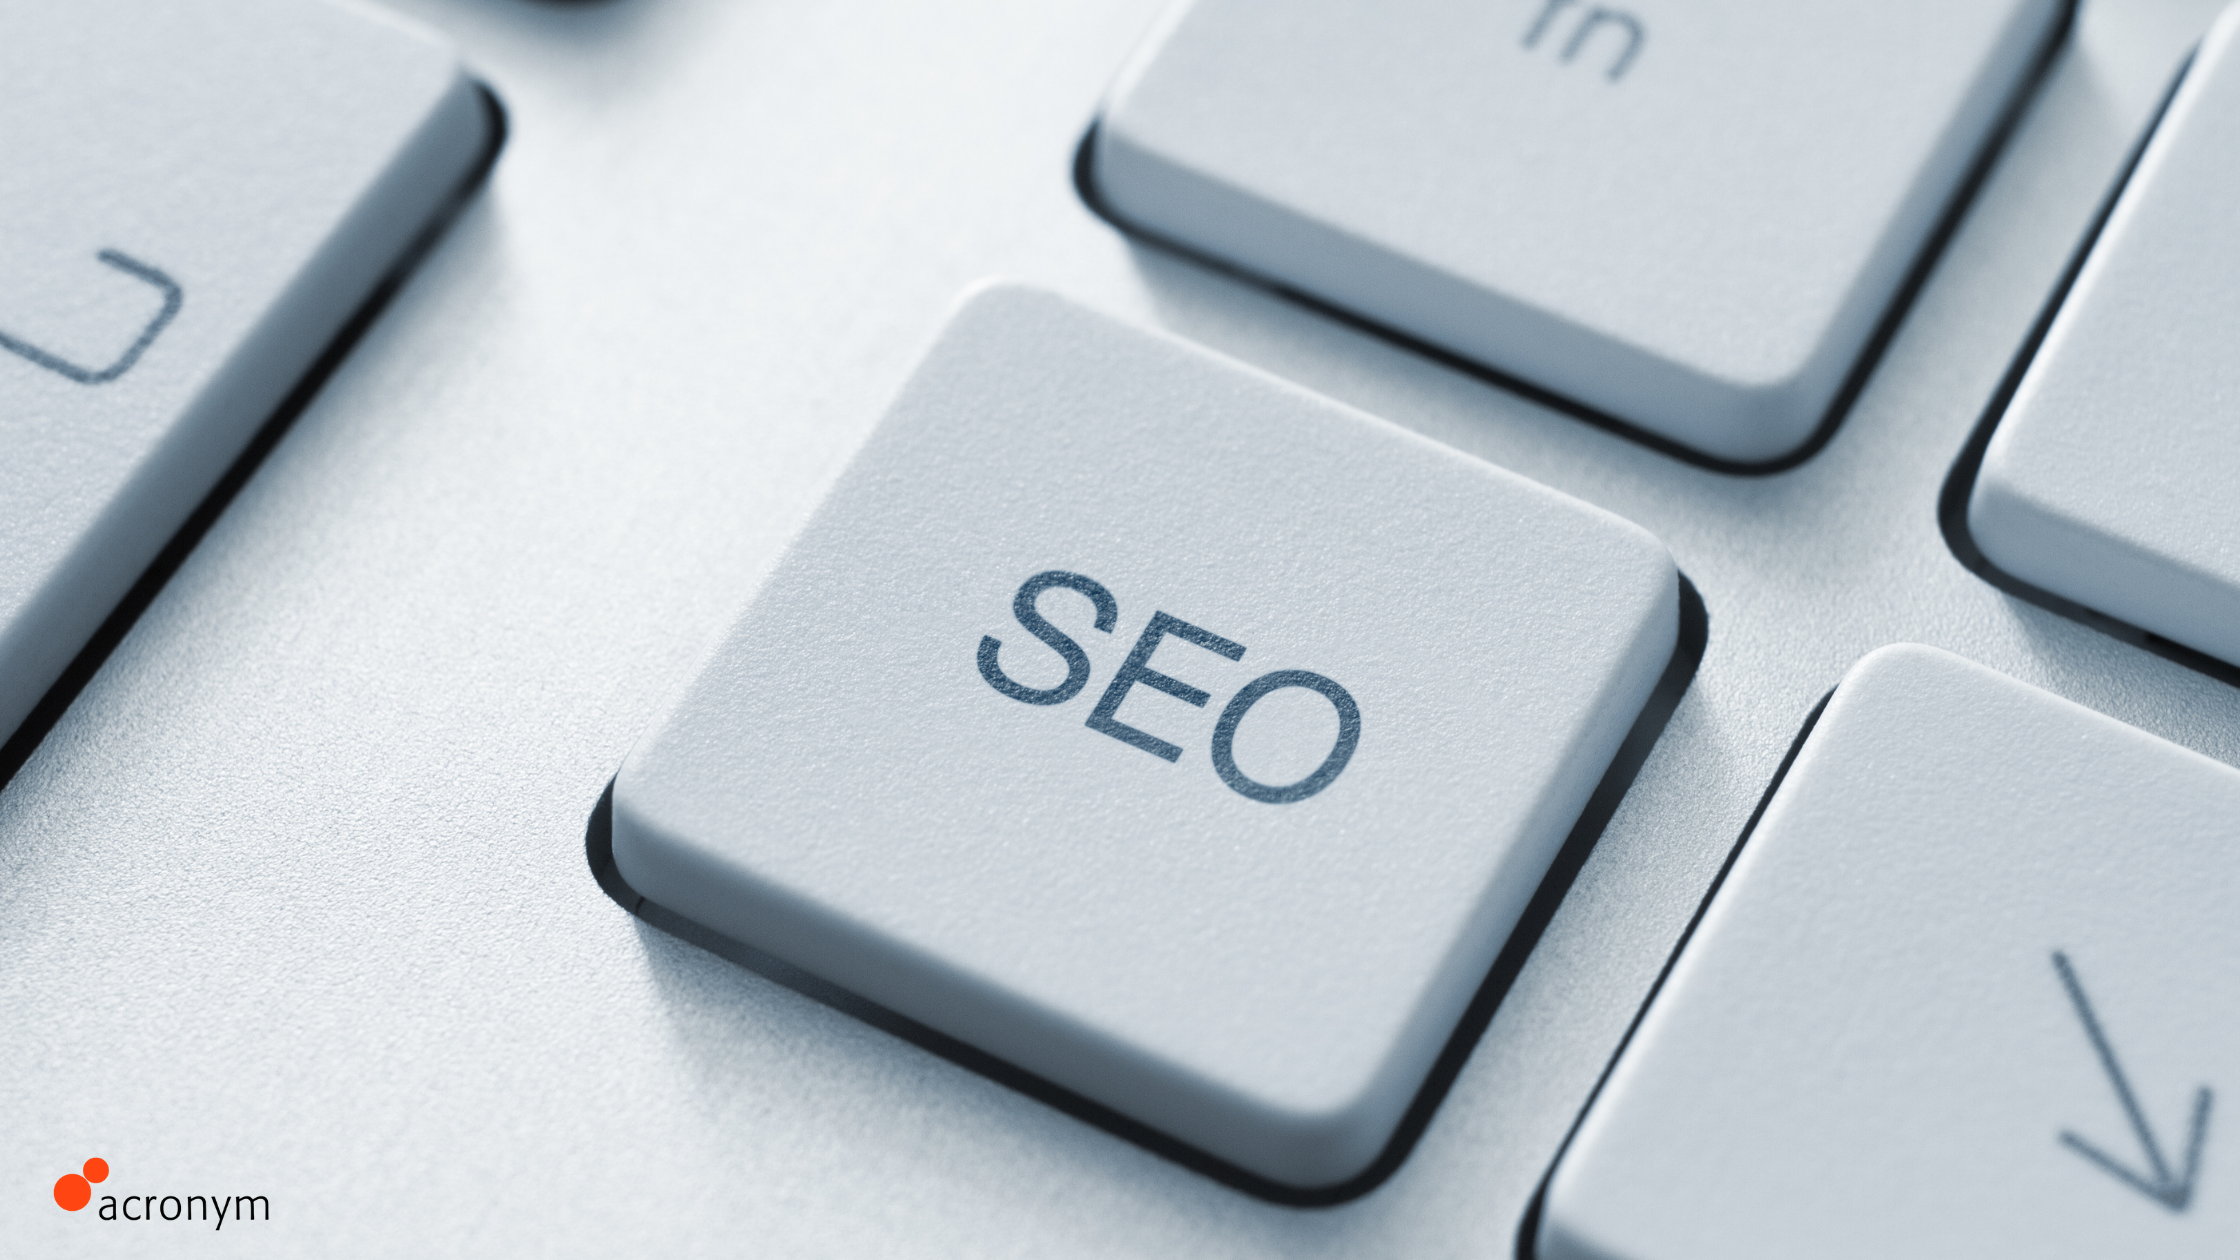 7 Reasons Why & How B2B Enterprise Brands Should Invest in SEO